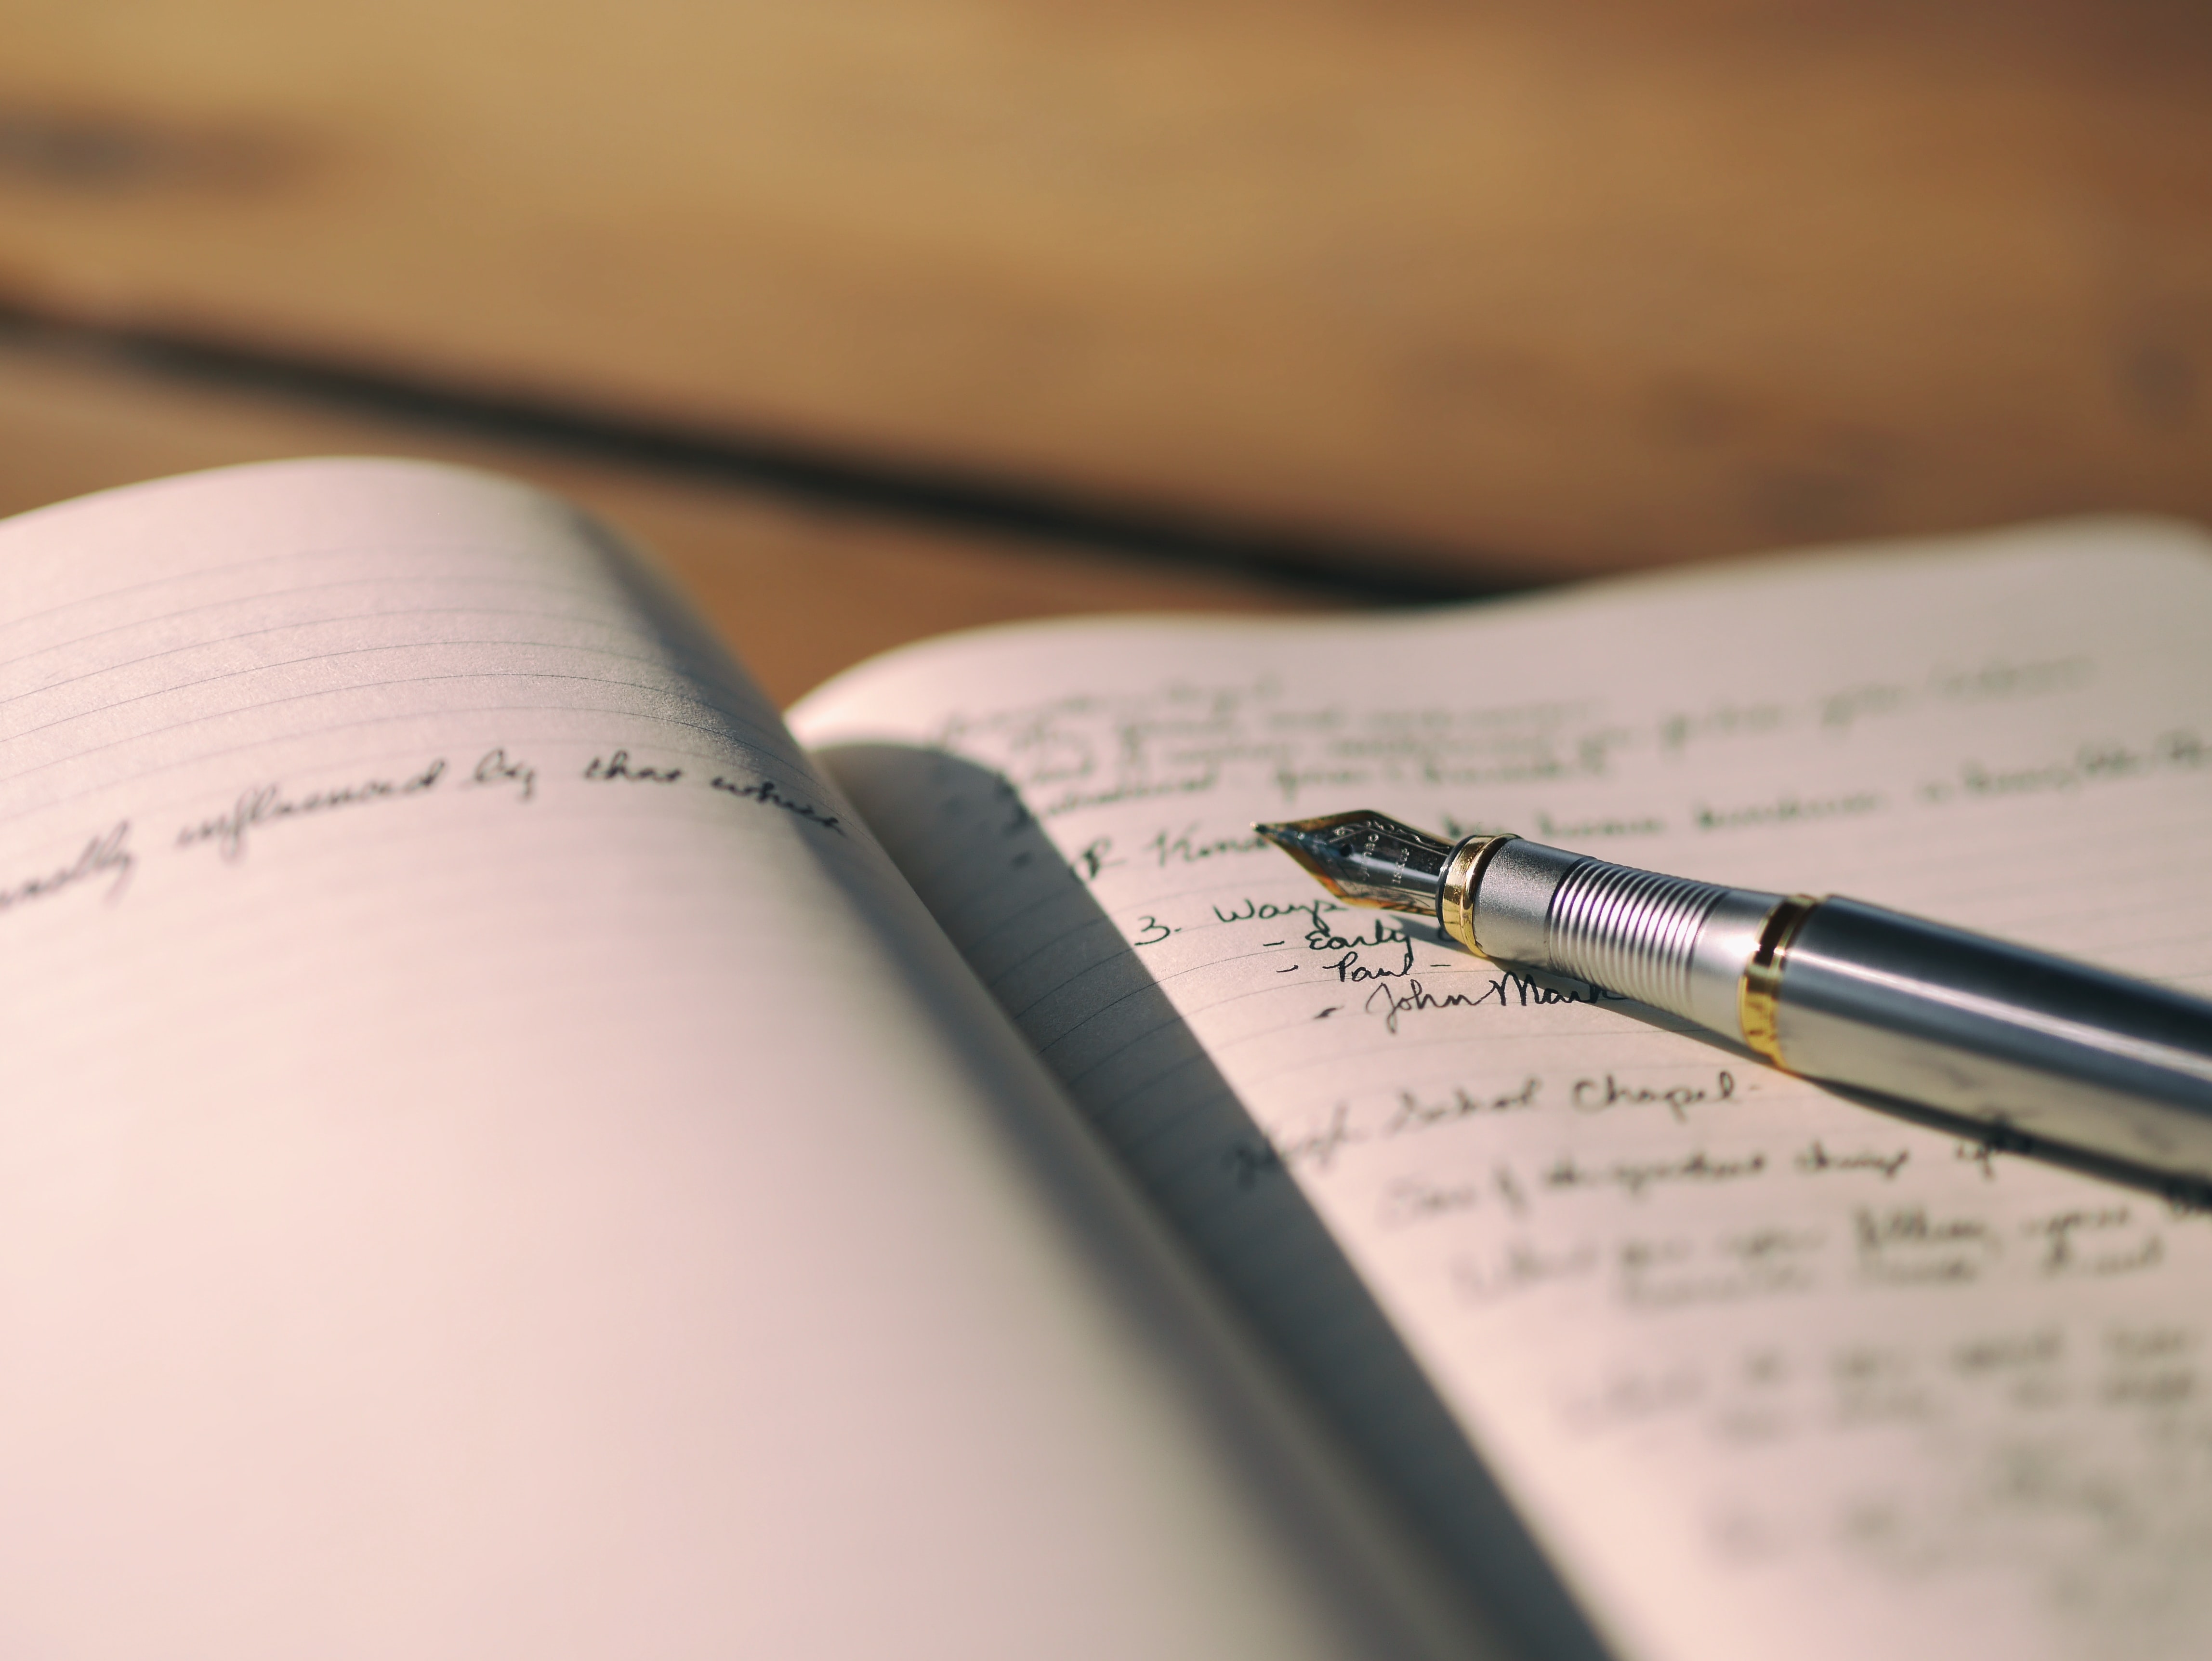 A journal lies open, handwriting visible on the right side of a page beneath a fountain pen.